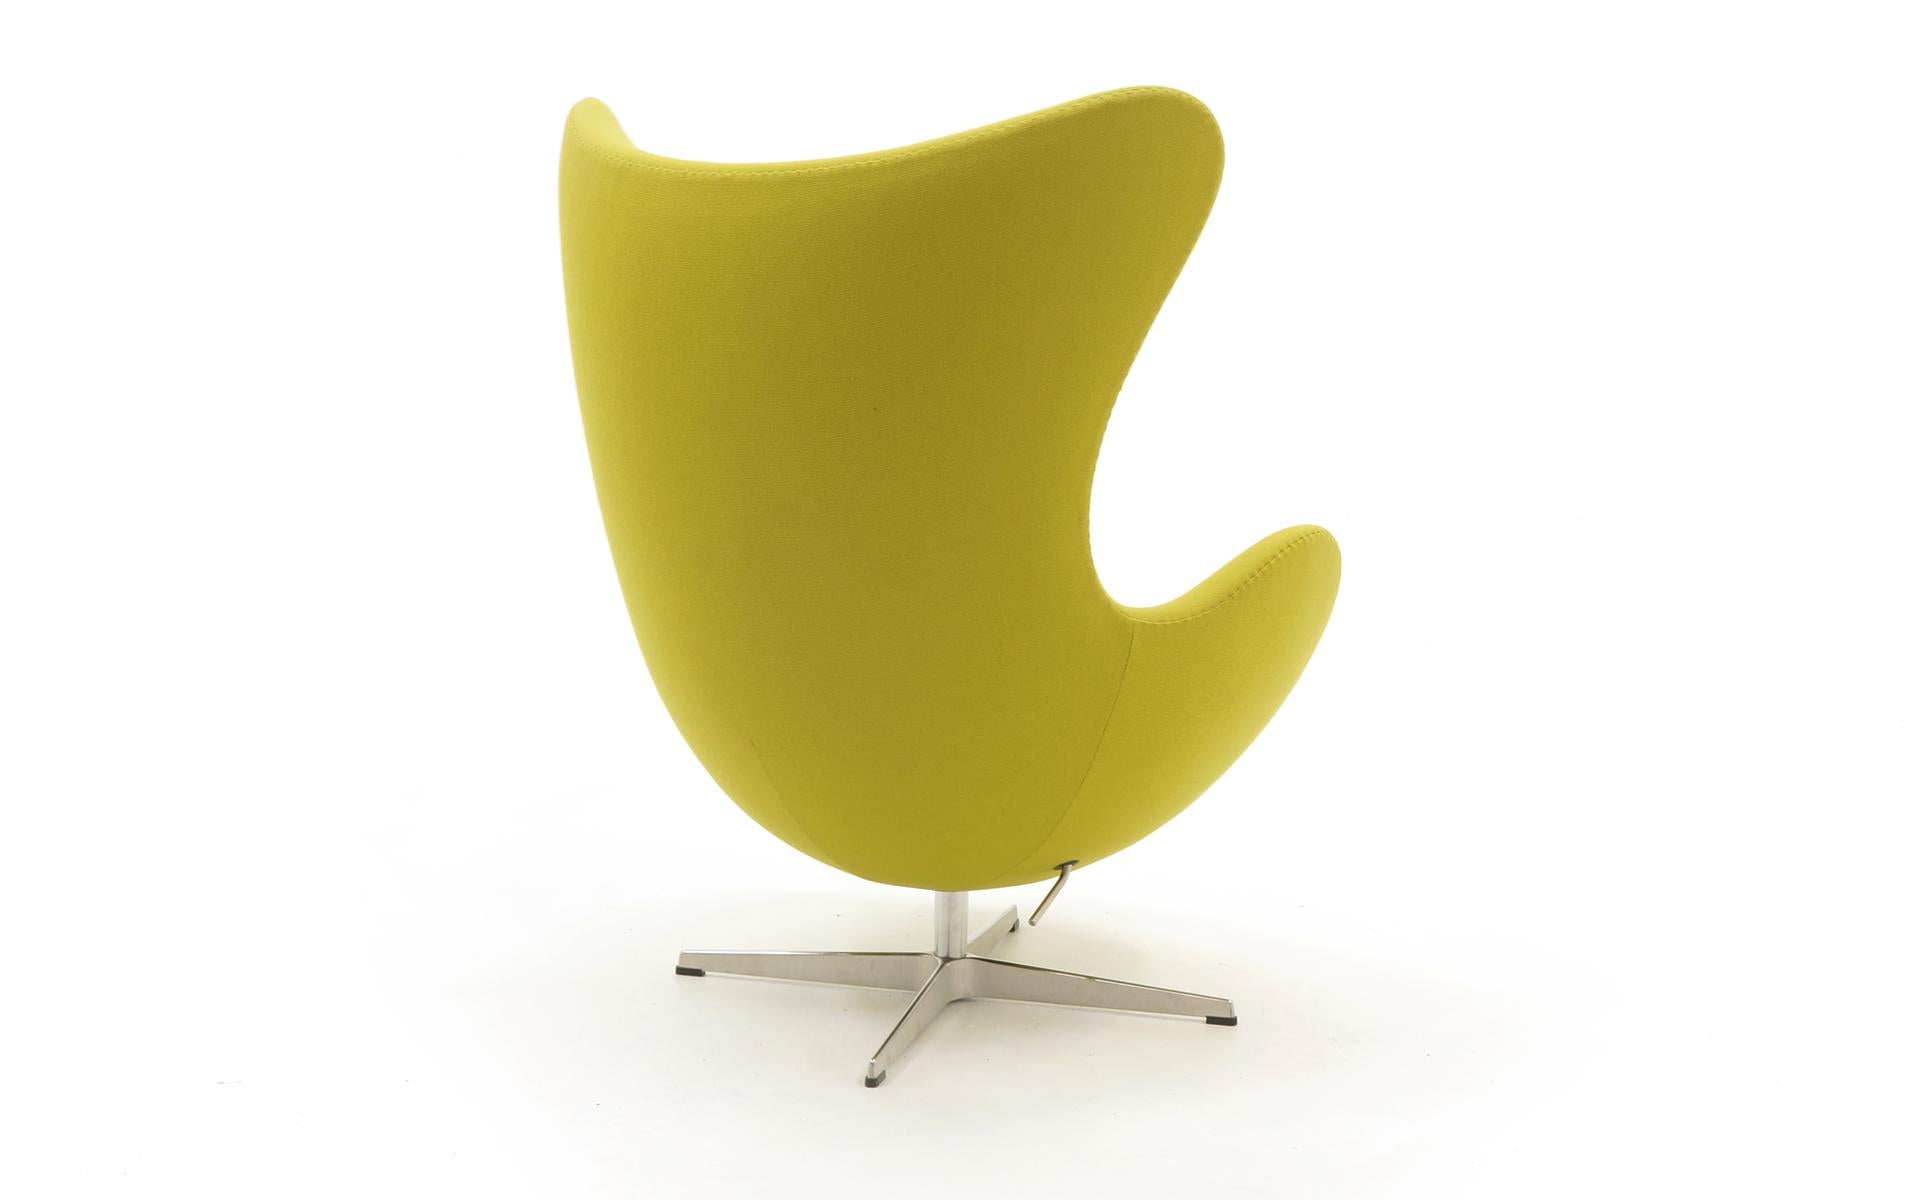 chartreuse chair